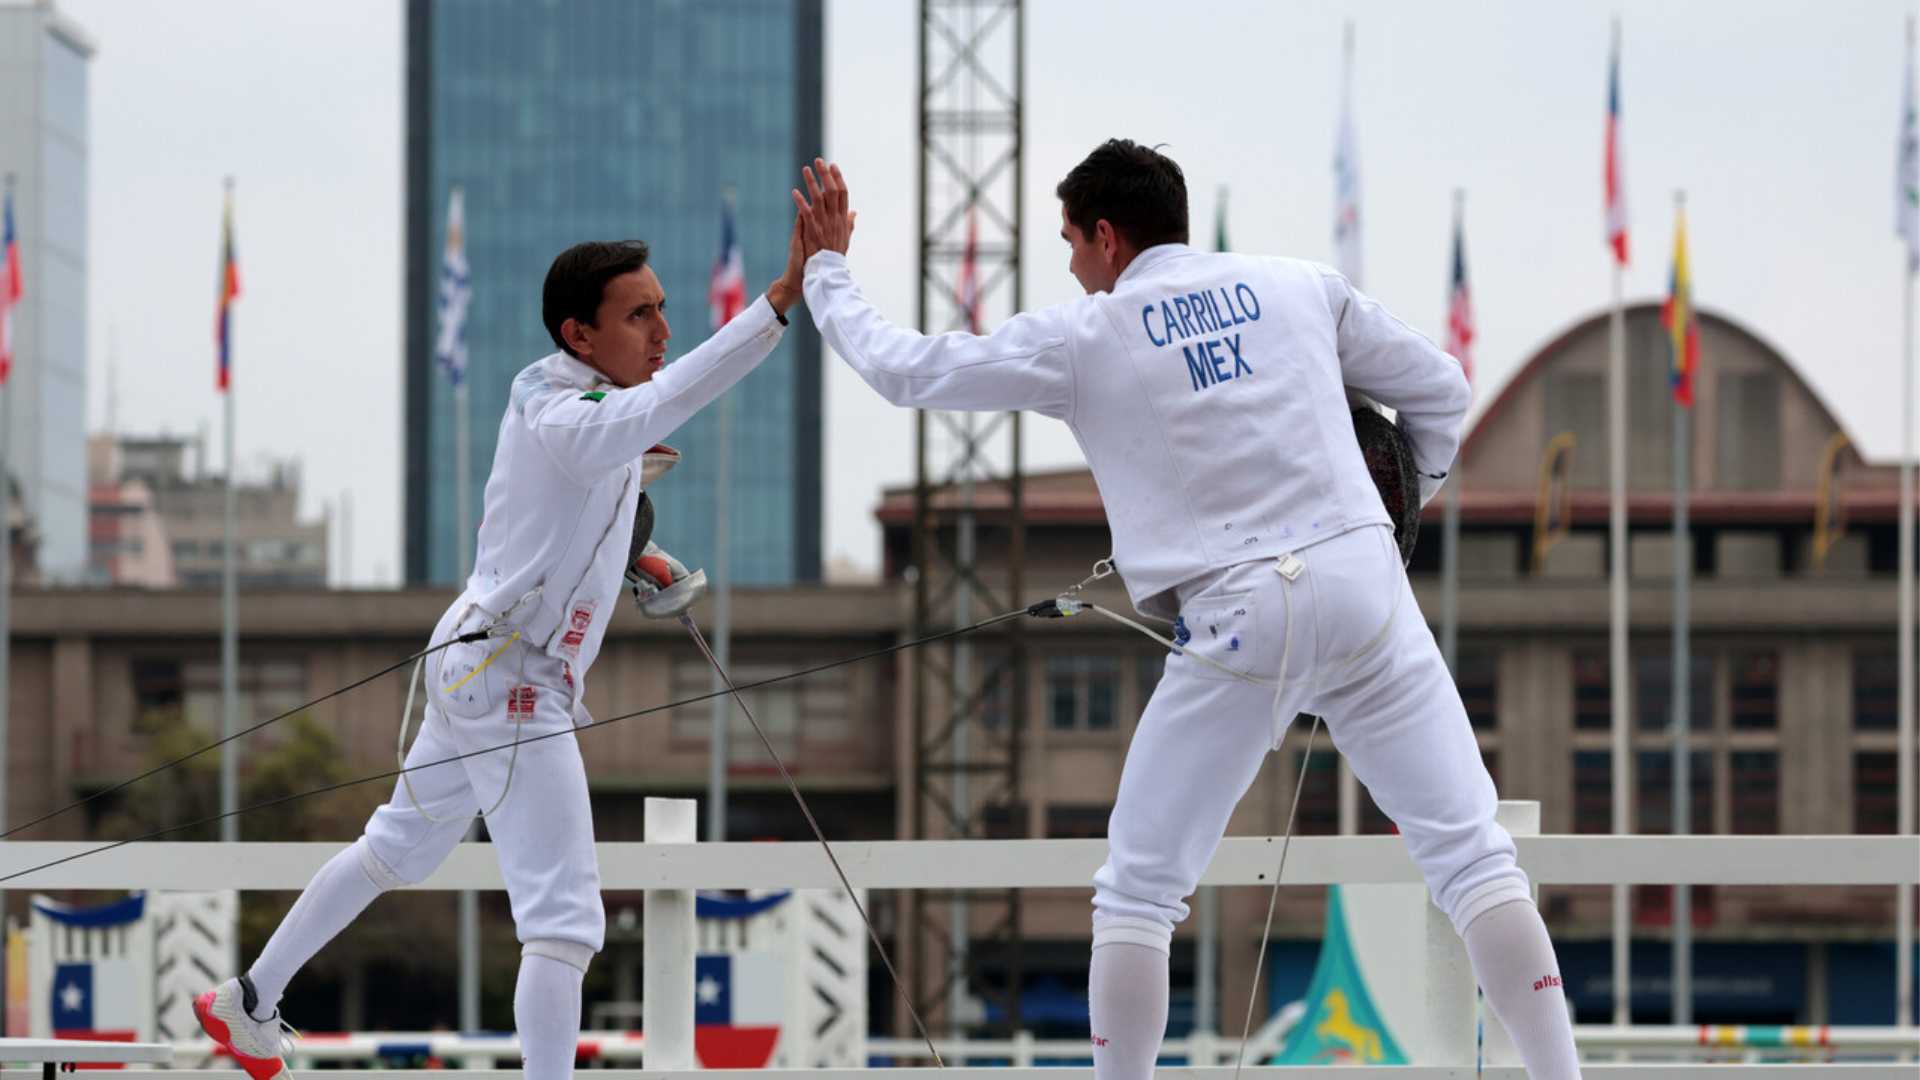 Mexico dominates in modern pentathlon: they also win the male's relay